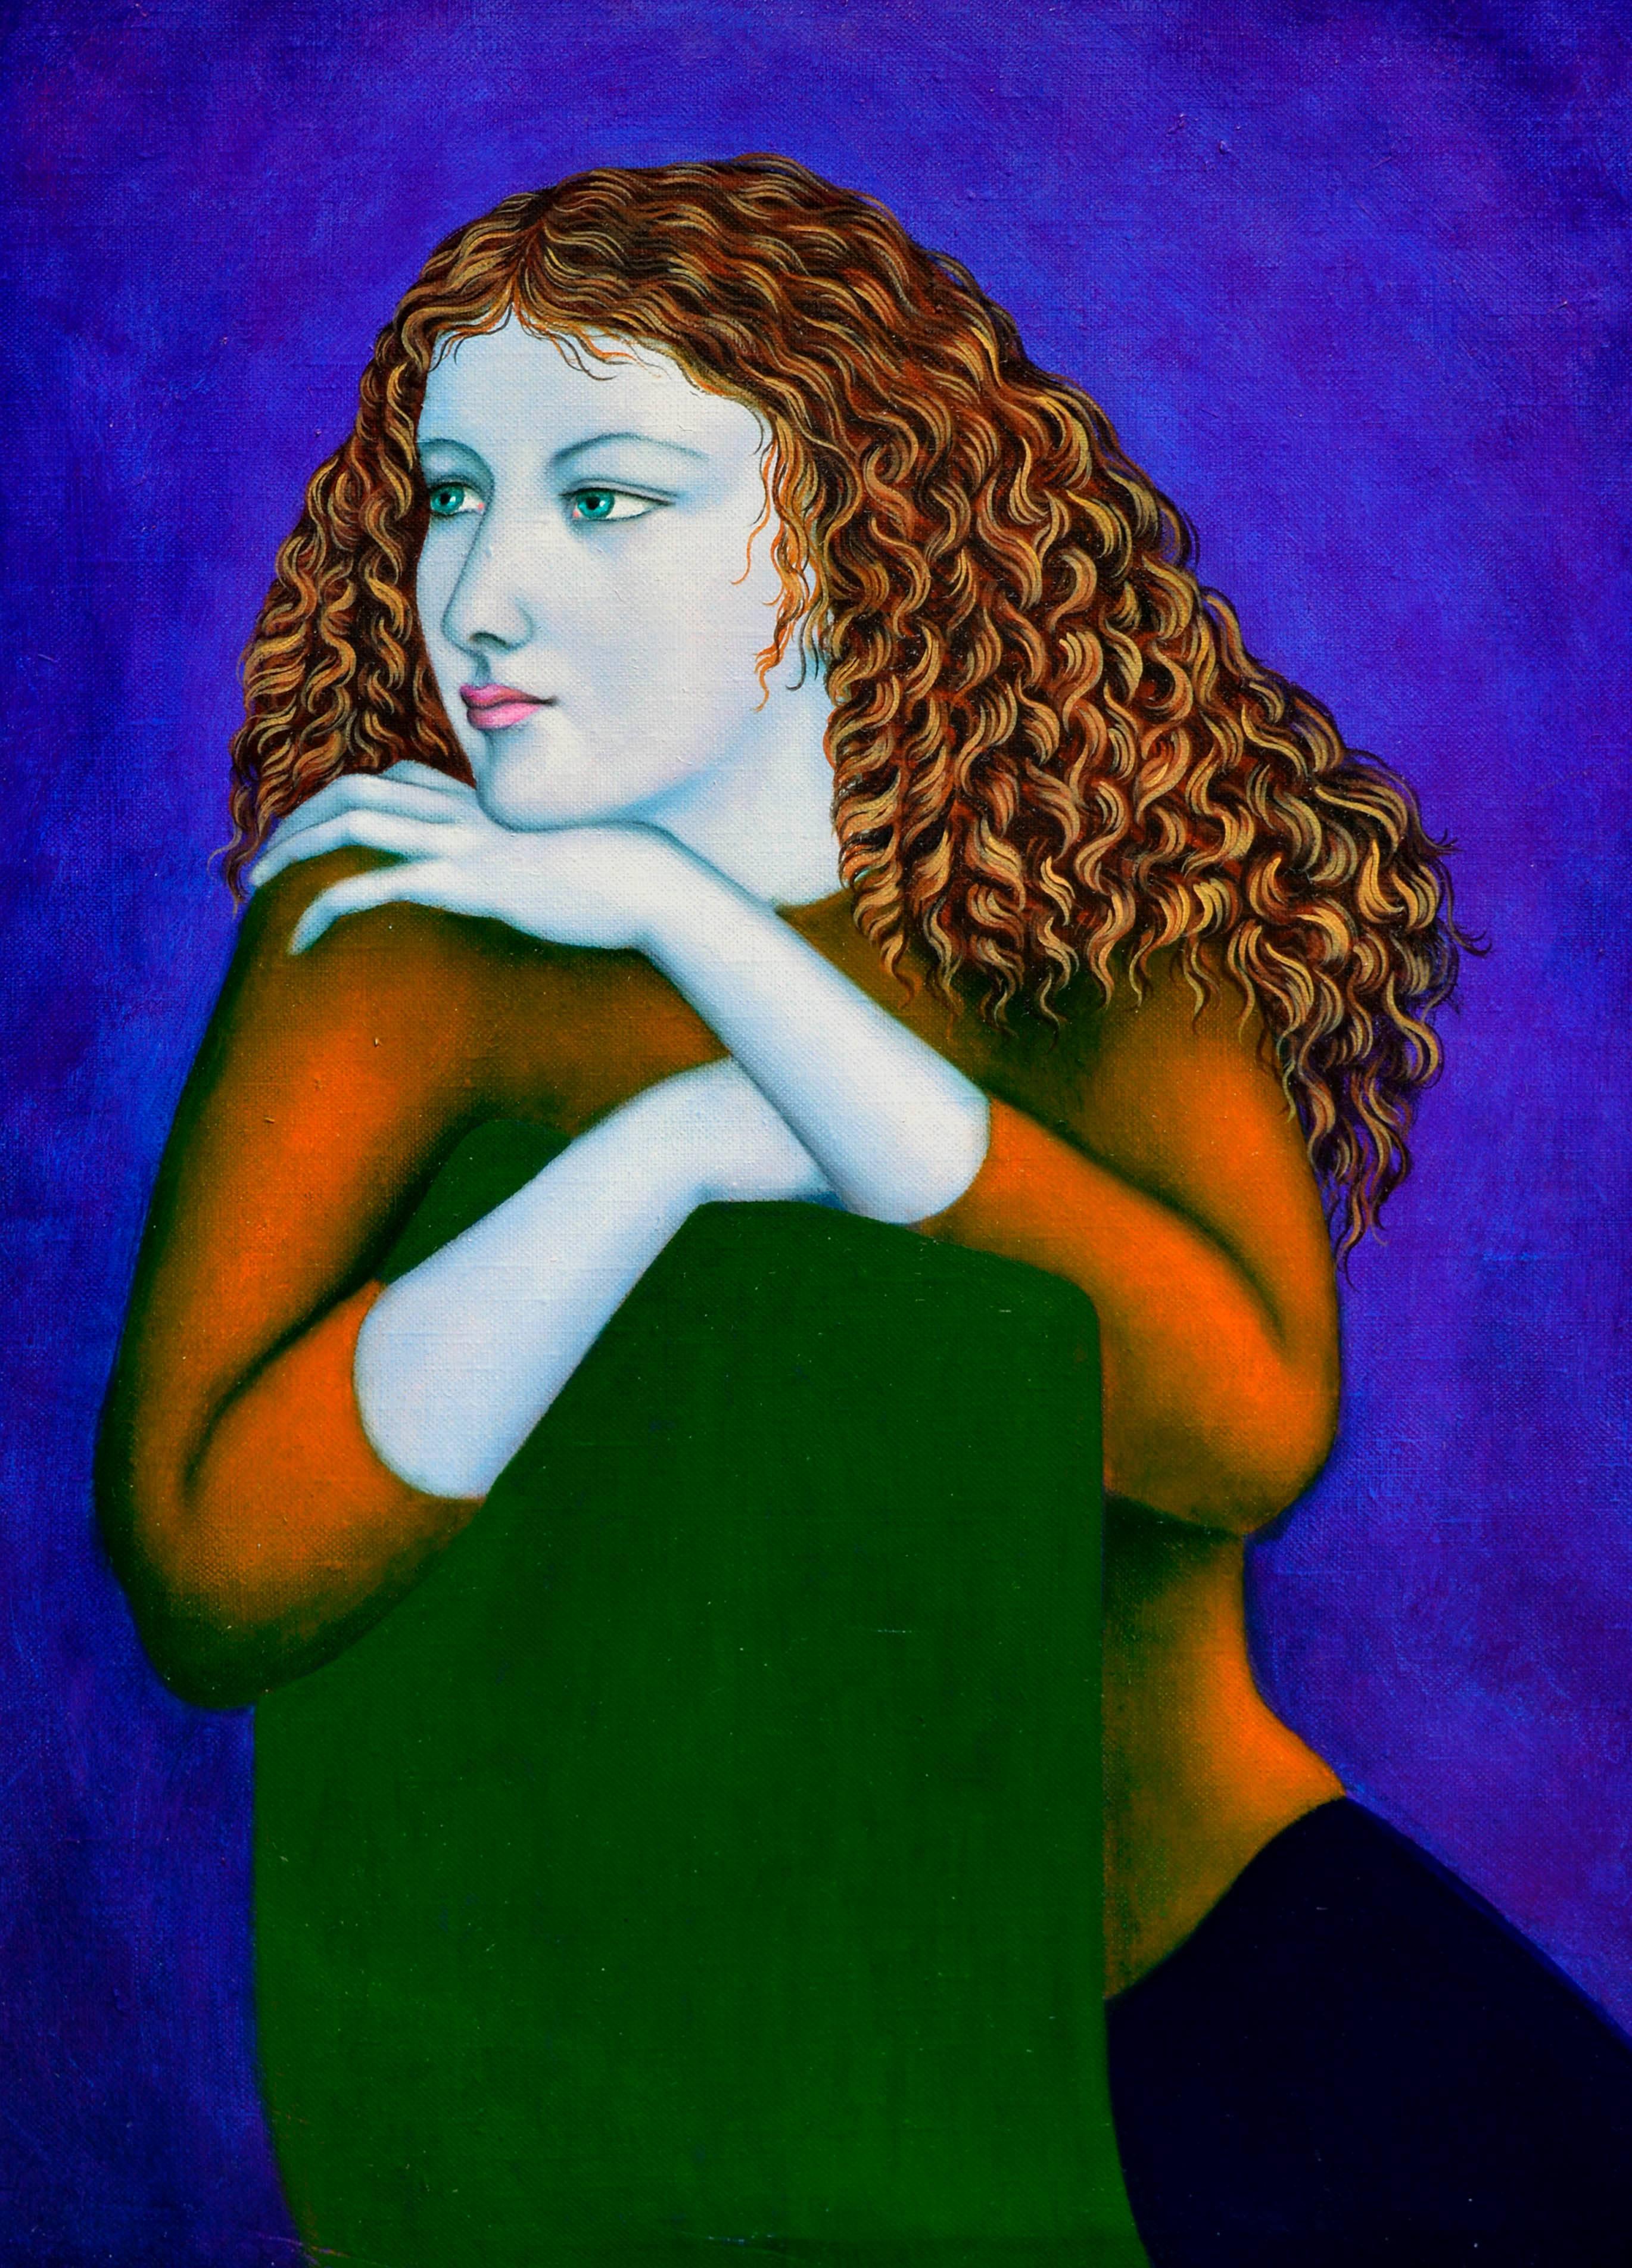 Red Haired Girl - Painting by Alexander E. Anderson